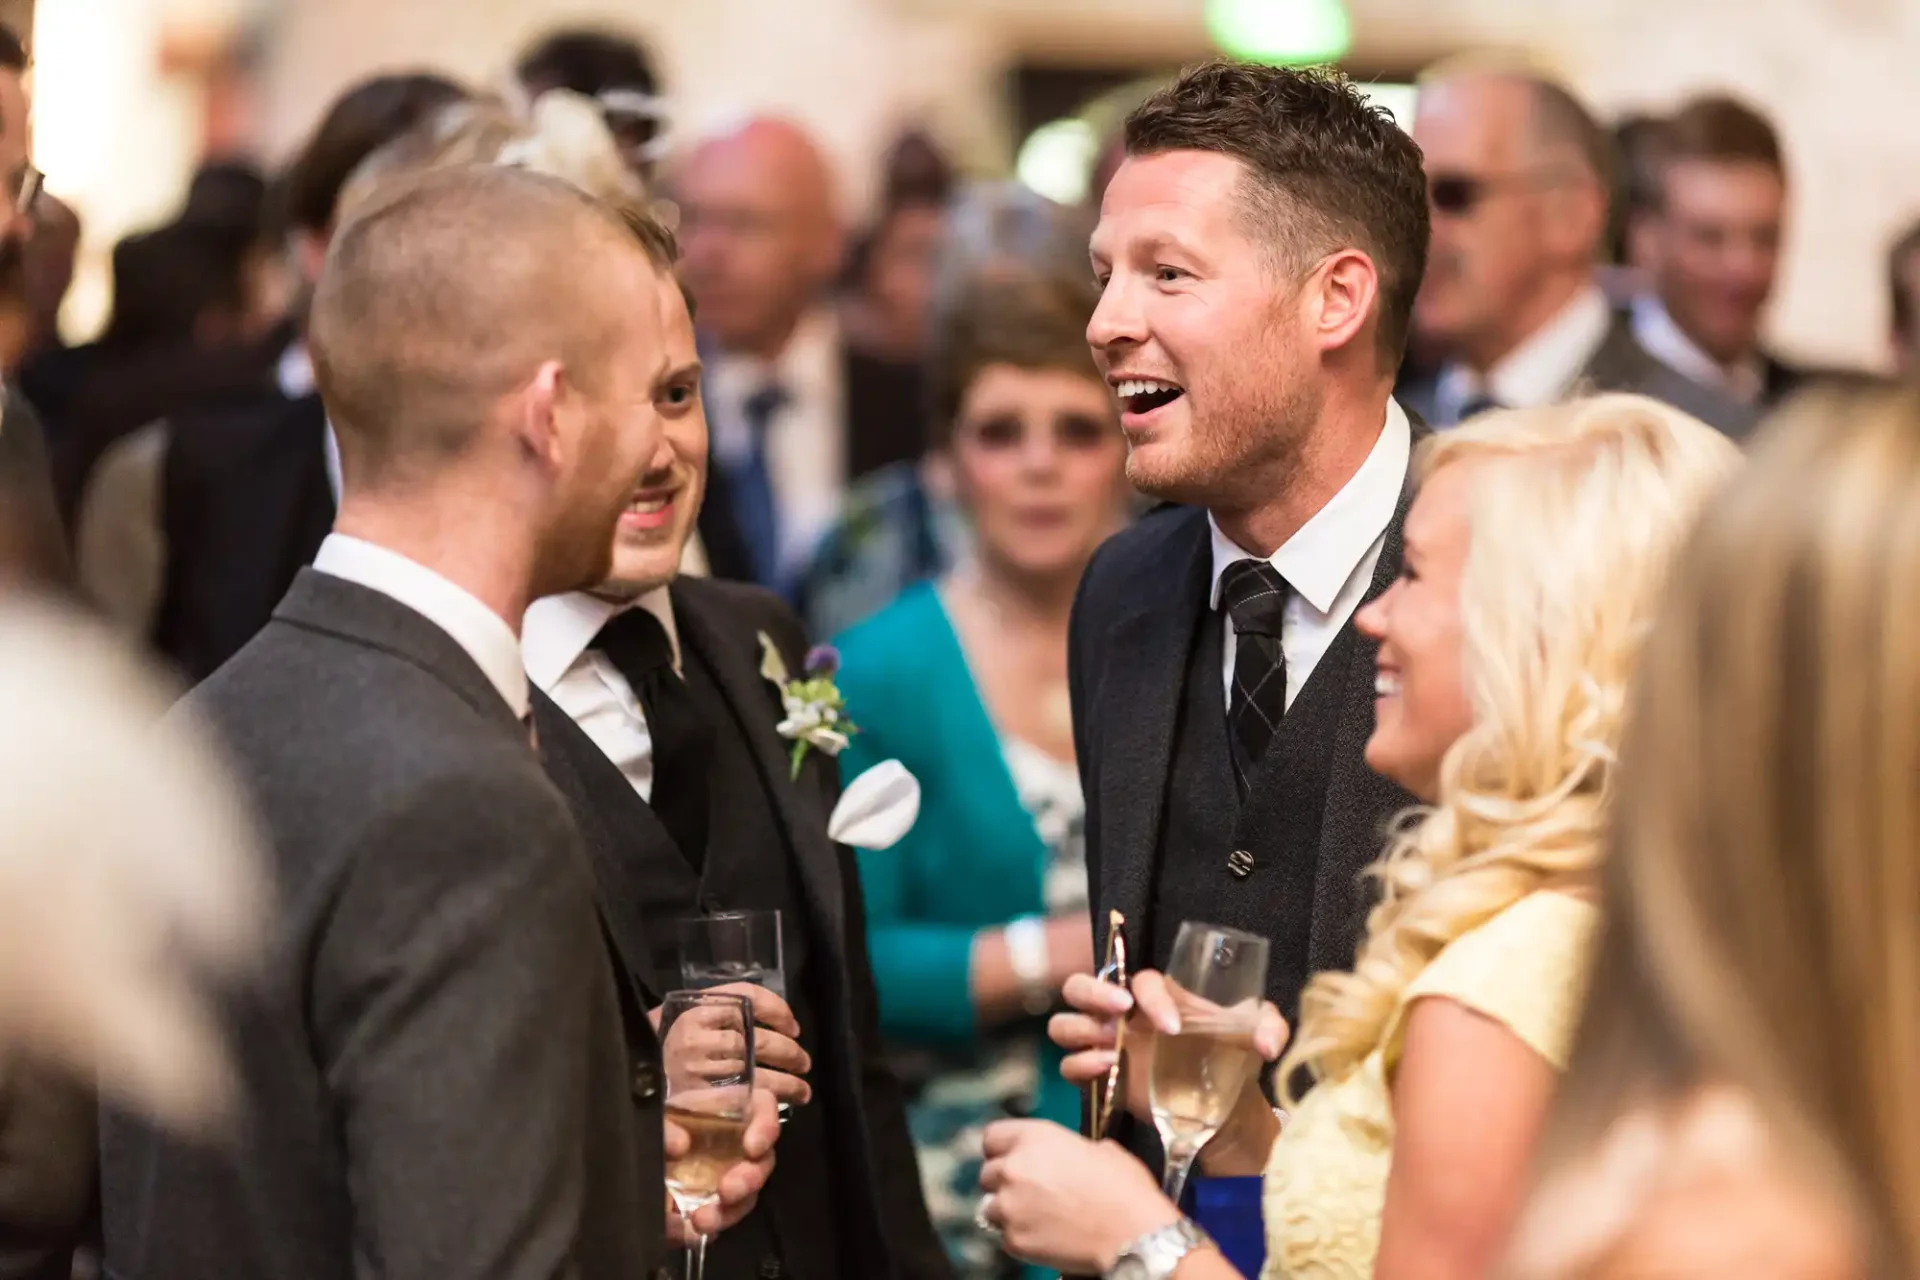 Two men in suits smiling and talking at a wedding reception, surrounded by guests with drinks.